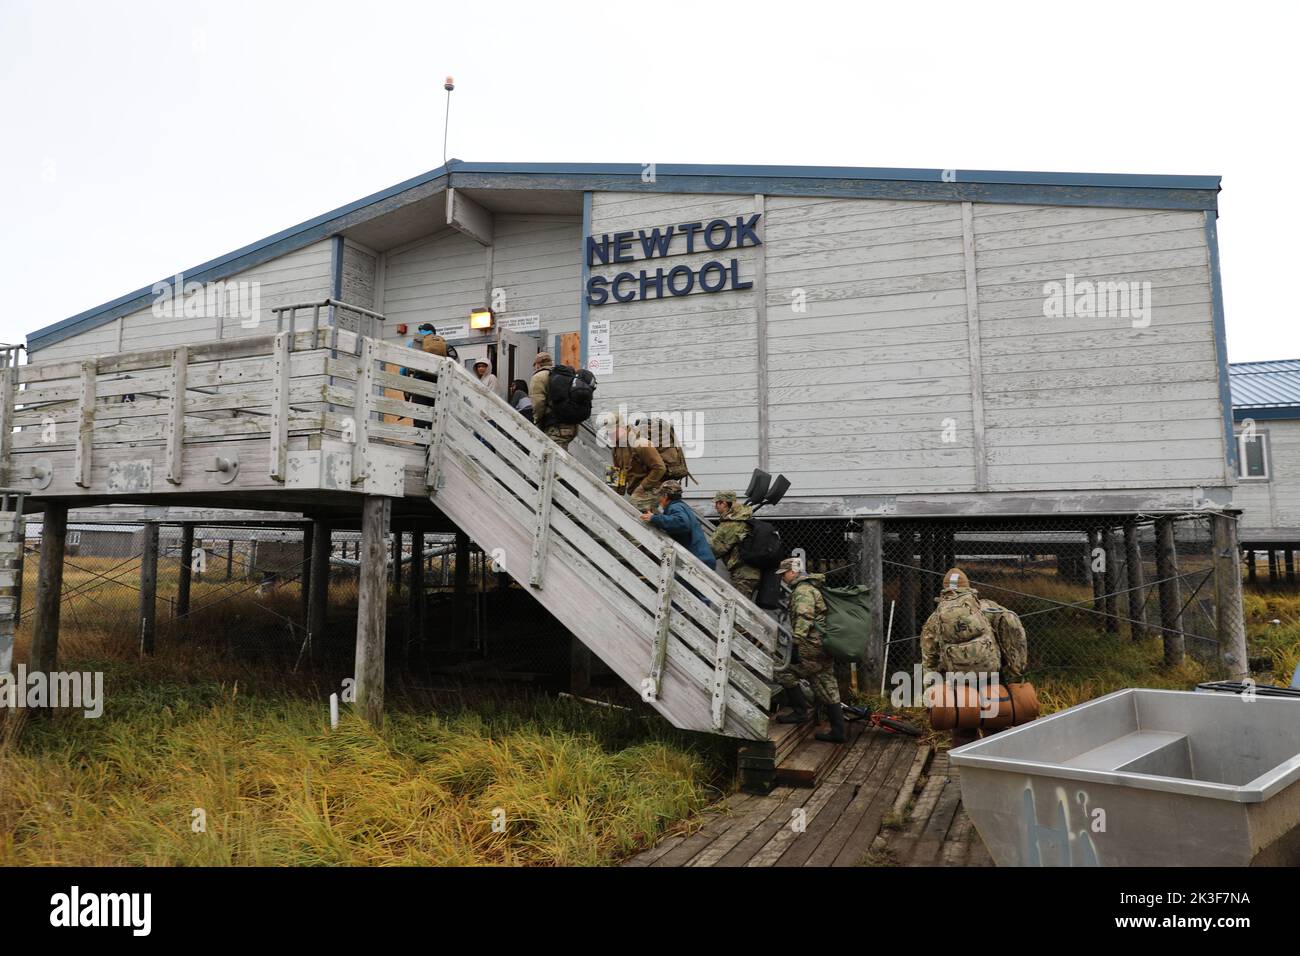 U.S. soldiers with the Alaska National Guard enter the local school after landing to assist local residents with clean up in the aftermath of Typhoon Merbok, September 22, 2022 in Newtok, Alaska. The remote Native Alaskan villages suffered flooding across more than 1,000 miles of Alaskan coastline. Stock Photo